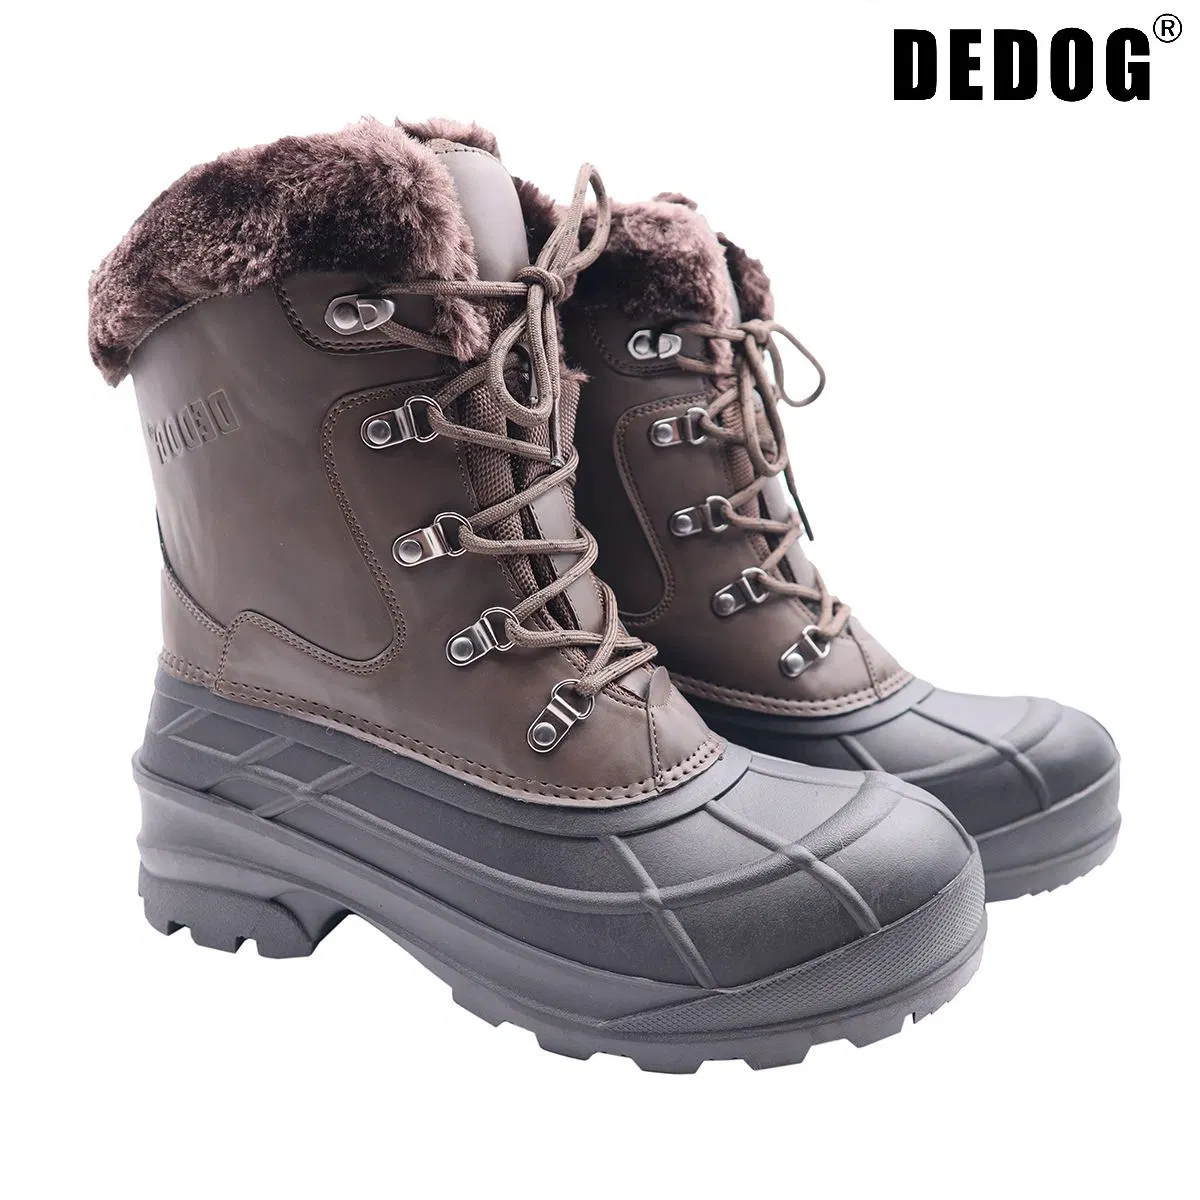 Waterproof Rubber Fishing Deck Boots Leather Boots Slip on Ankle Garden Shoes